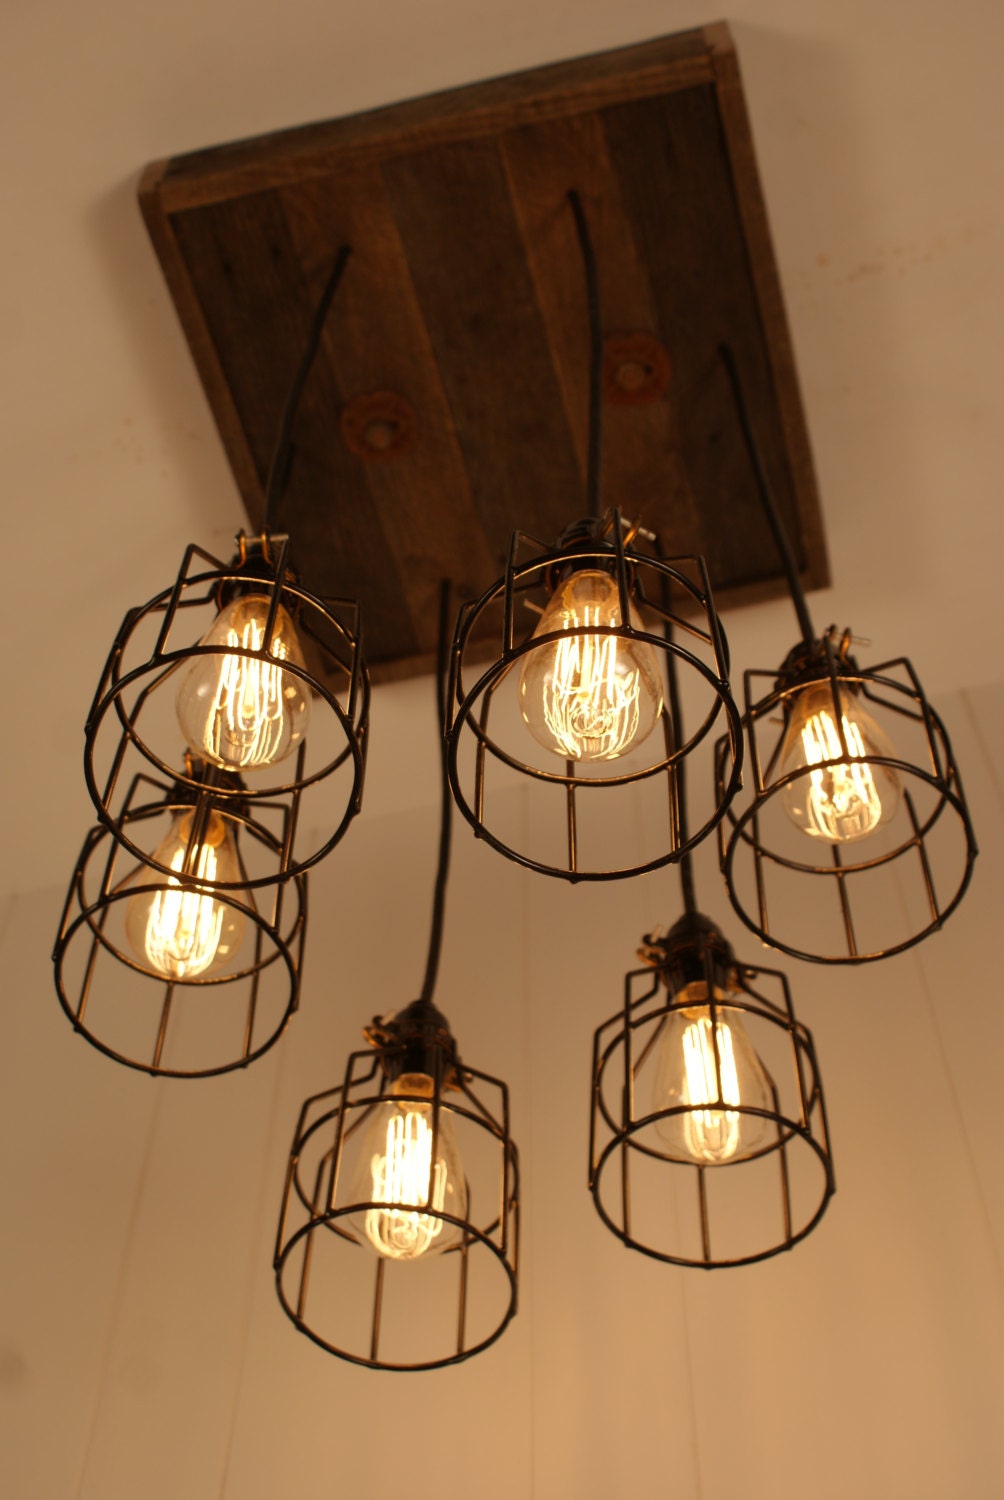 Cage Light Chandelier - Cage Lighting - Industrial Lighting - Edison Bulb - Upcycled Wood